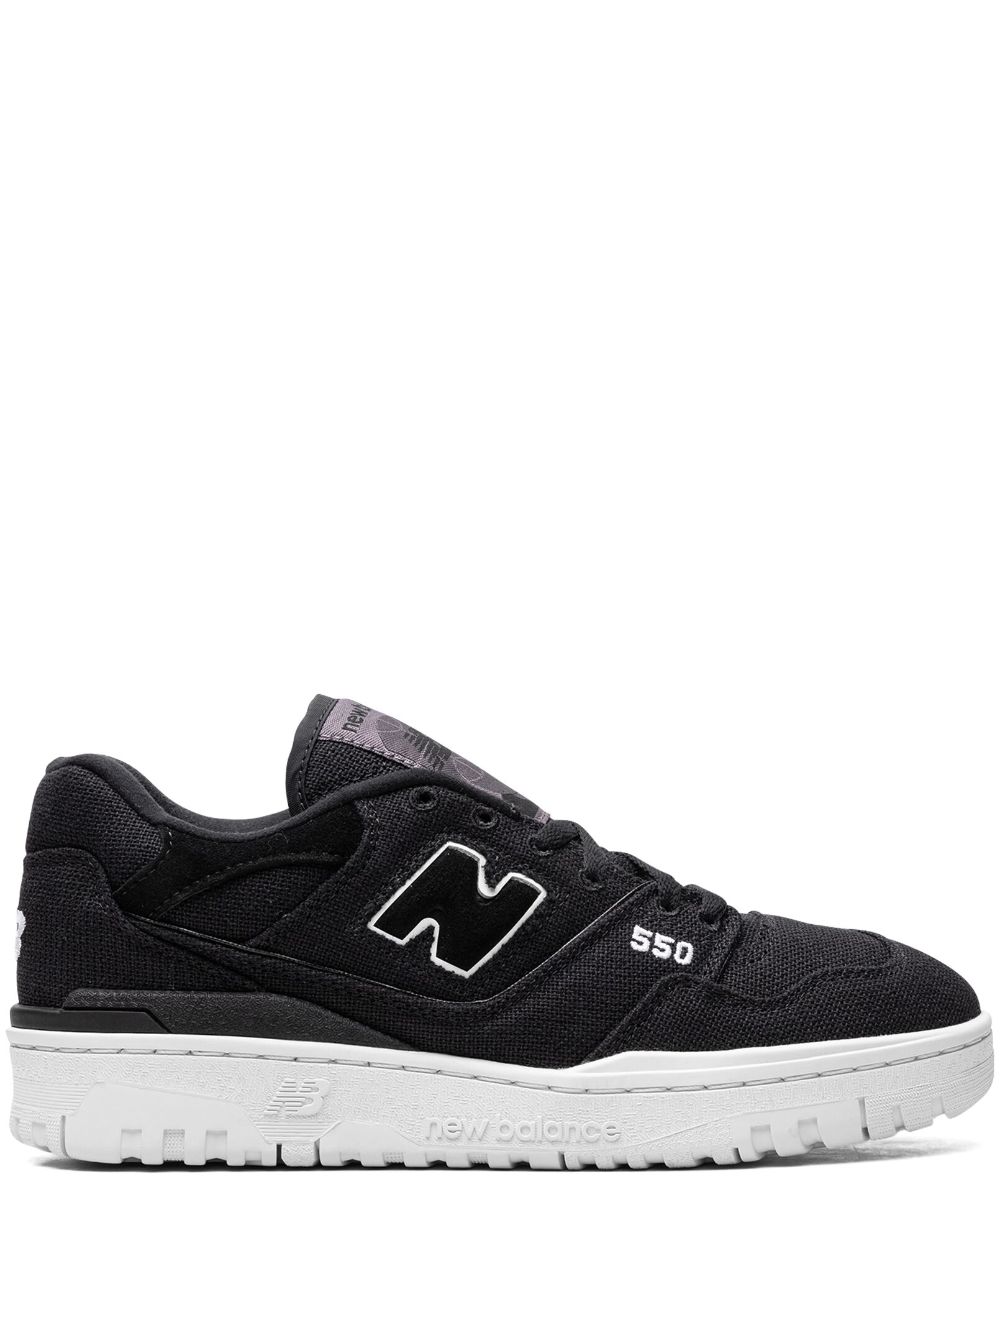 New Balance 550 suede low-top sneakers - Black